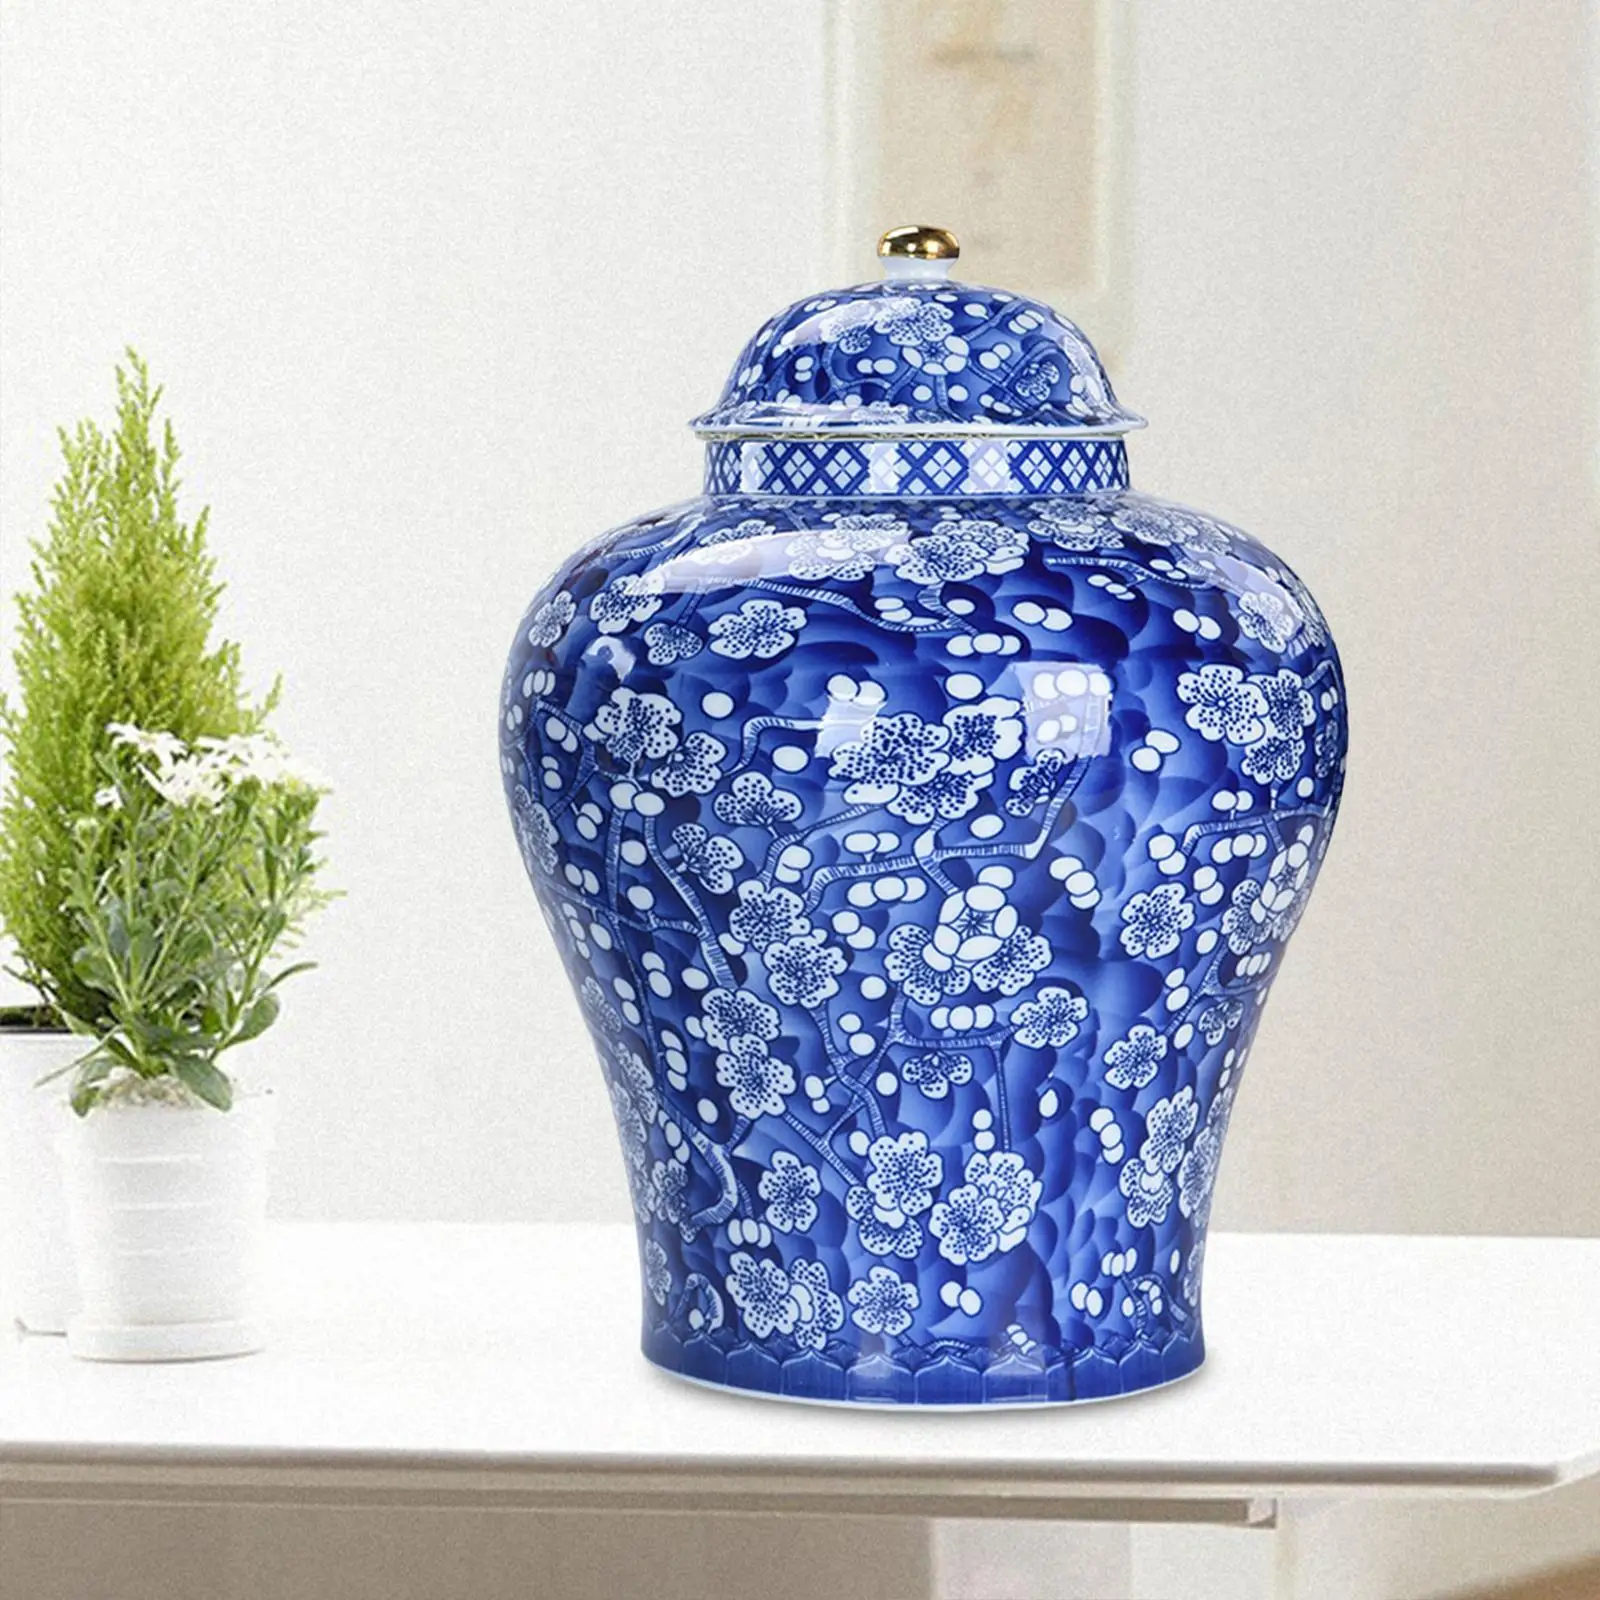 Chinese Style Plum Blossom Porcelain Ginger Jar with Lid Centerpiece Asian Decor Glazed Multi Purpose Tea Storage Blue and White